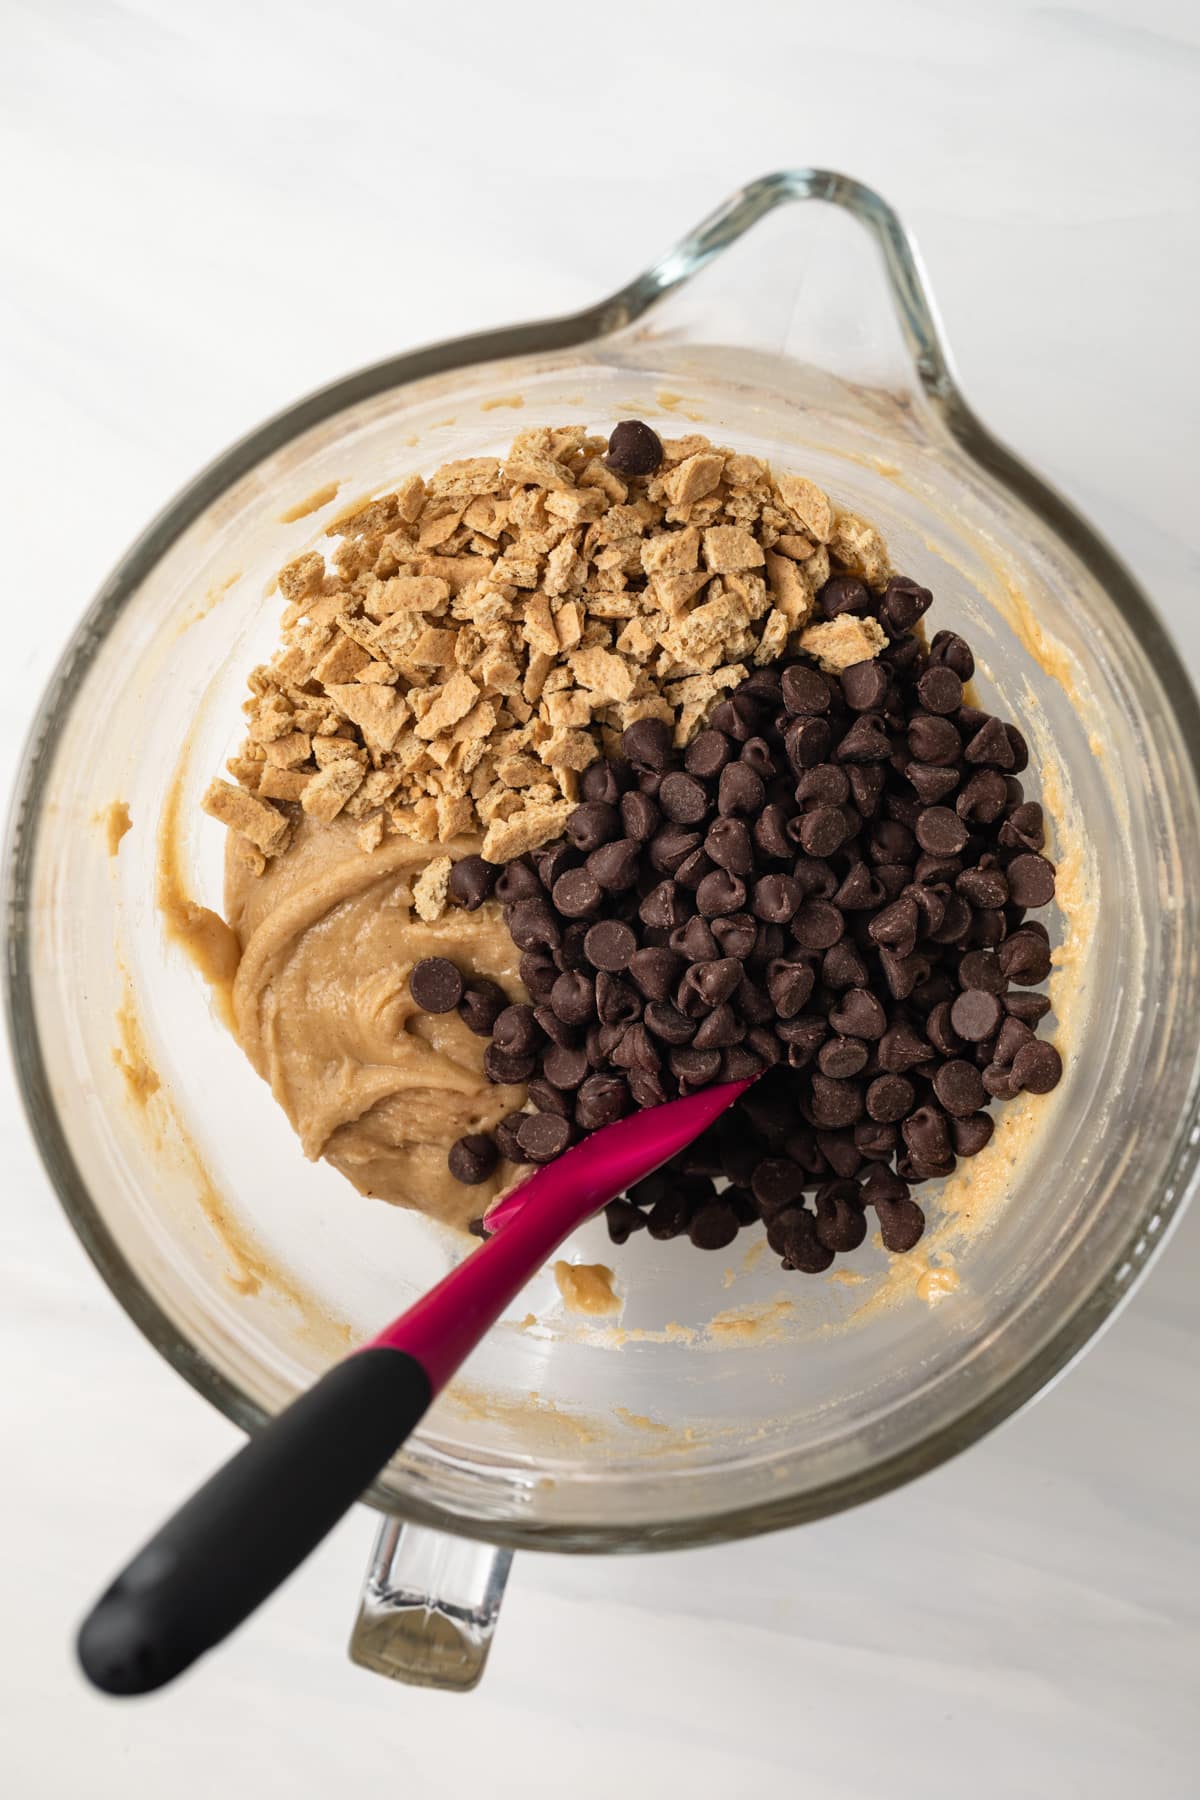 Cookie dough with chocolate chips and graham cracker pieces in glass bowl.